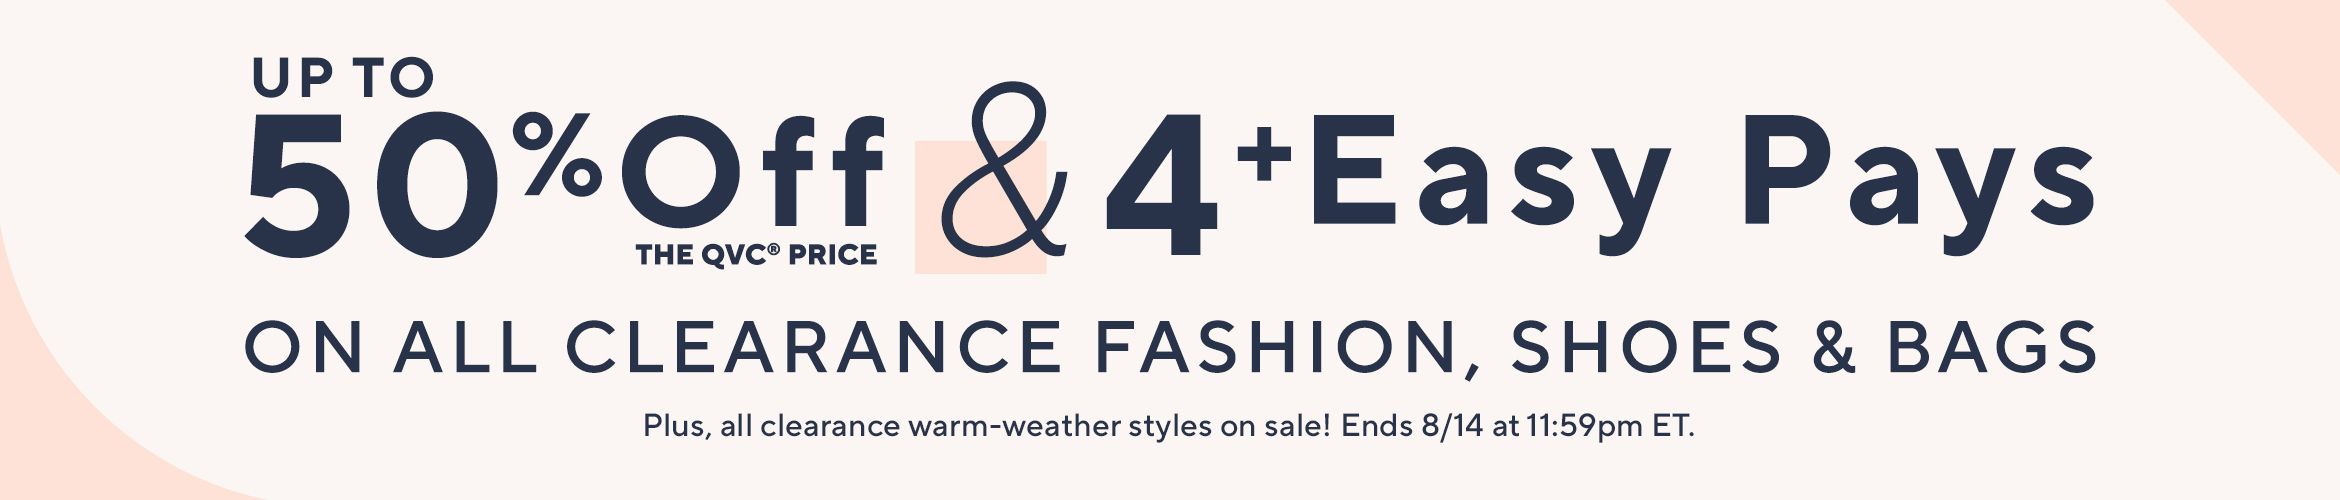 Up to 50% Off the QVC® Price & 4+ Easy Pays on All Clearance Fashion, Shoes & Bags. Plus, all clearance warm-weather styles on sale! Ends 8/14 at 11:59pm ET. 